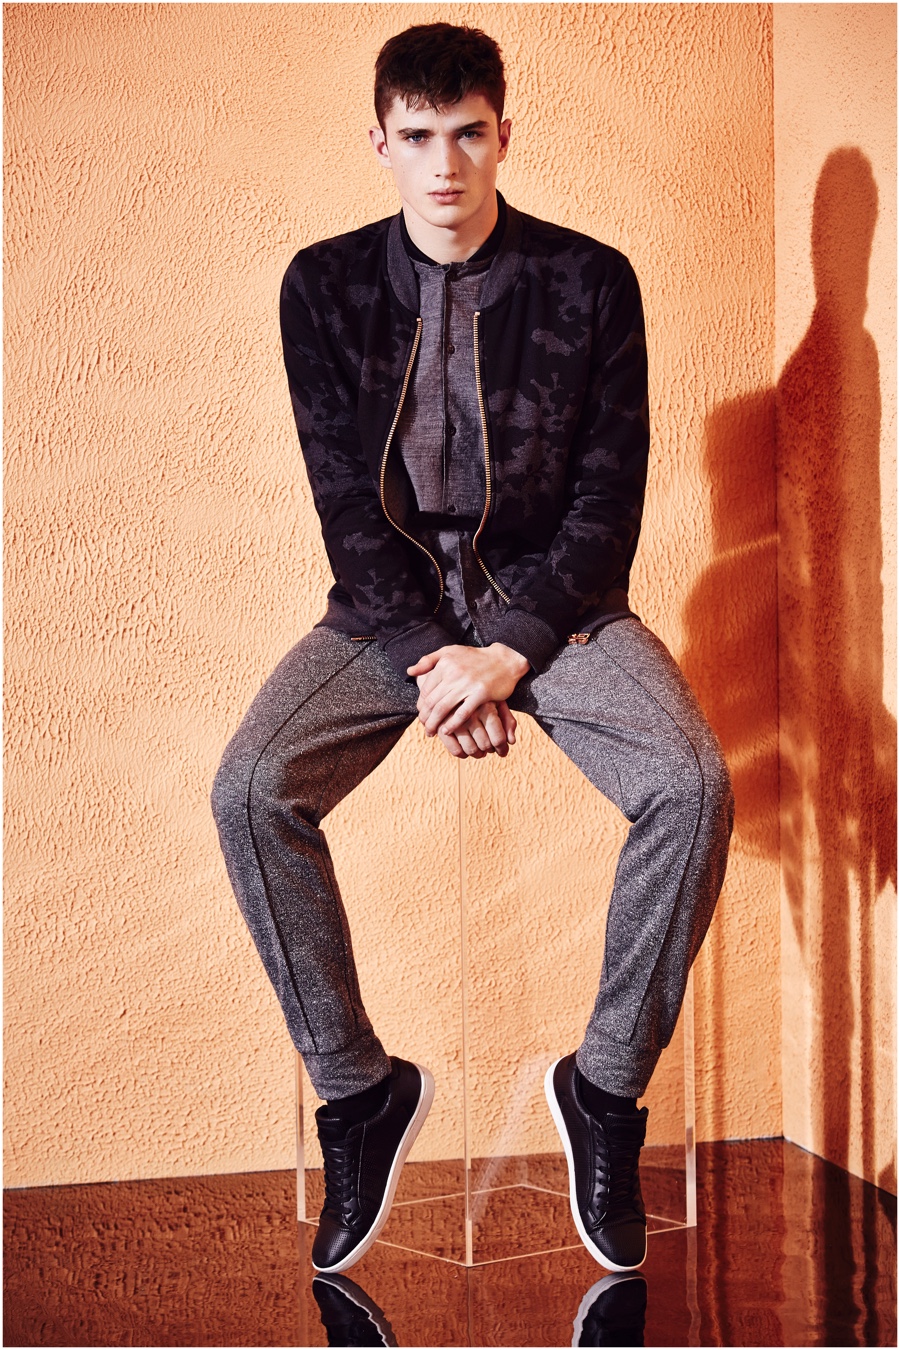 River Island Spring/Summer 2015 Men’s Collection | The Fashionisto